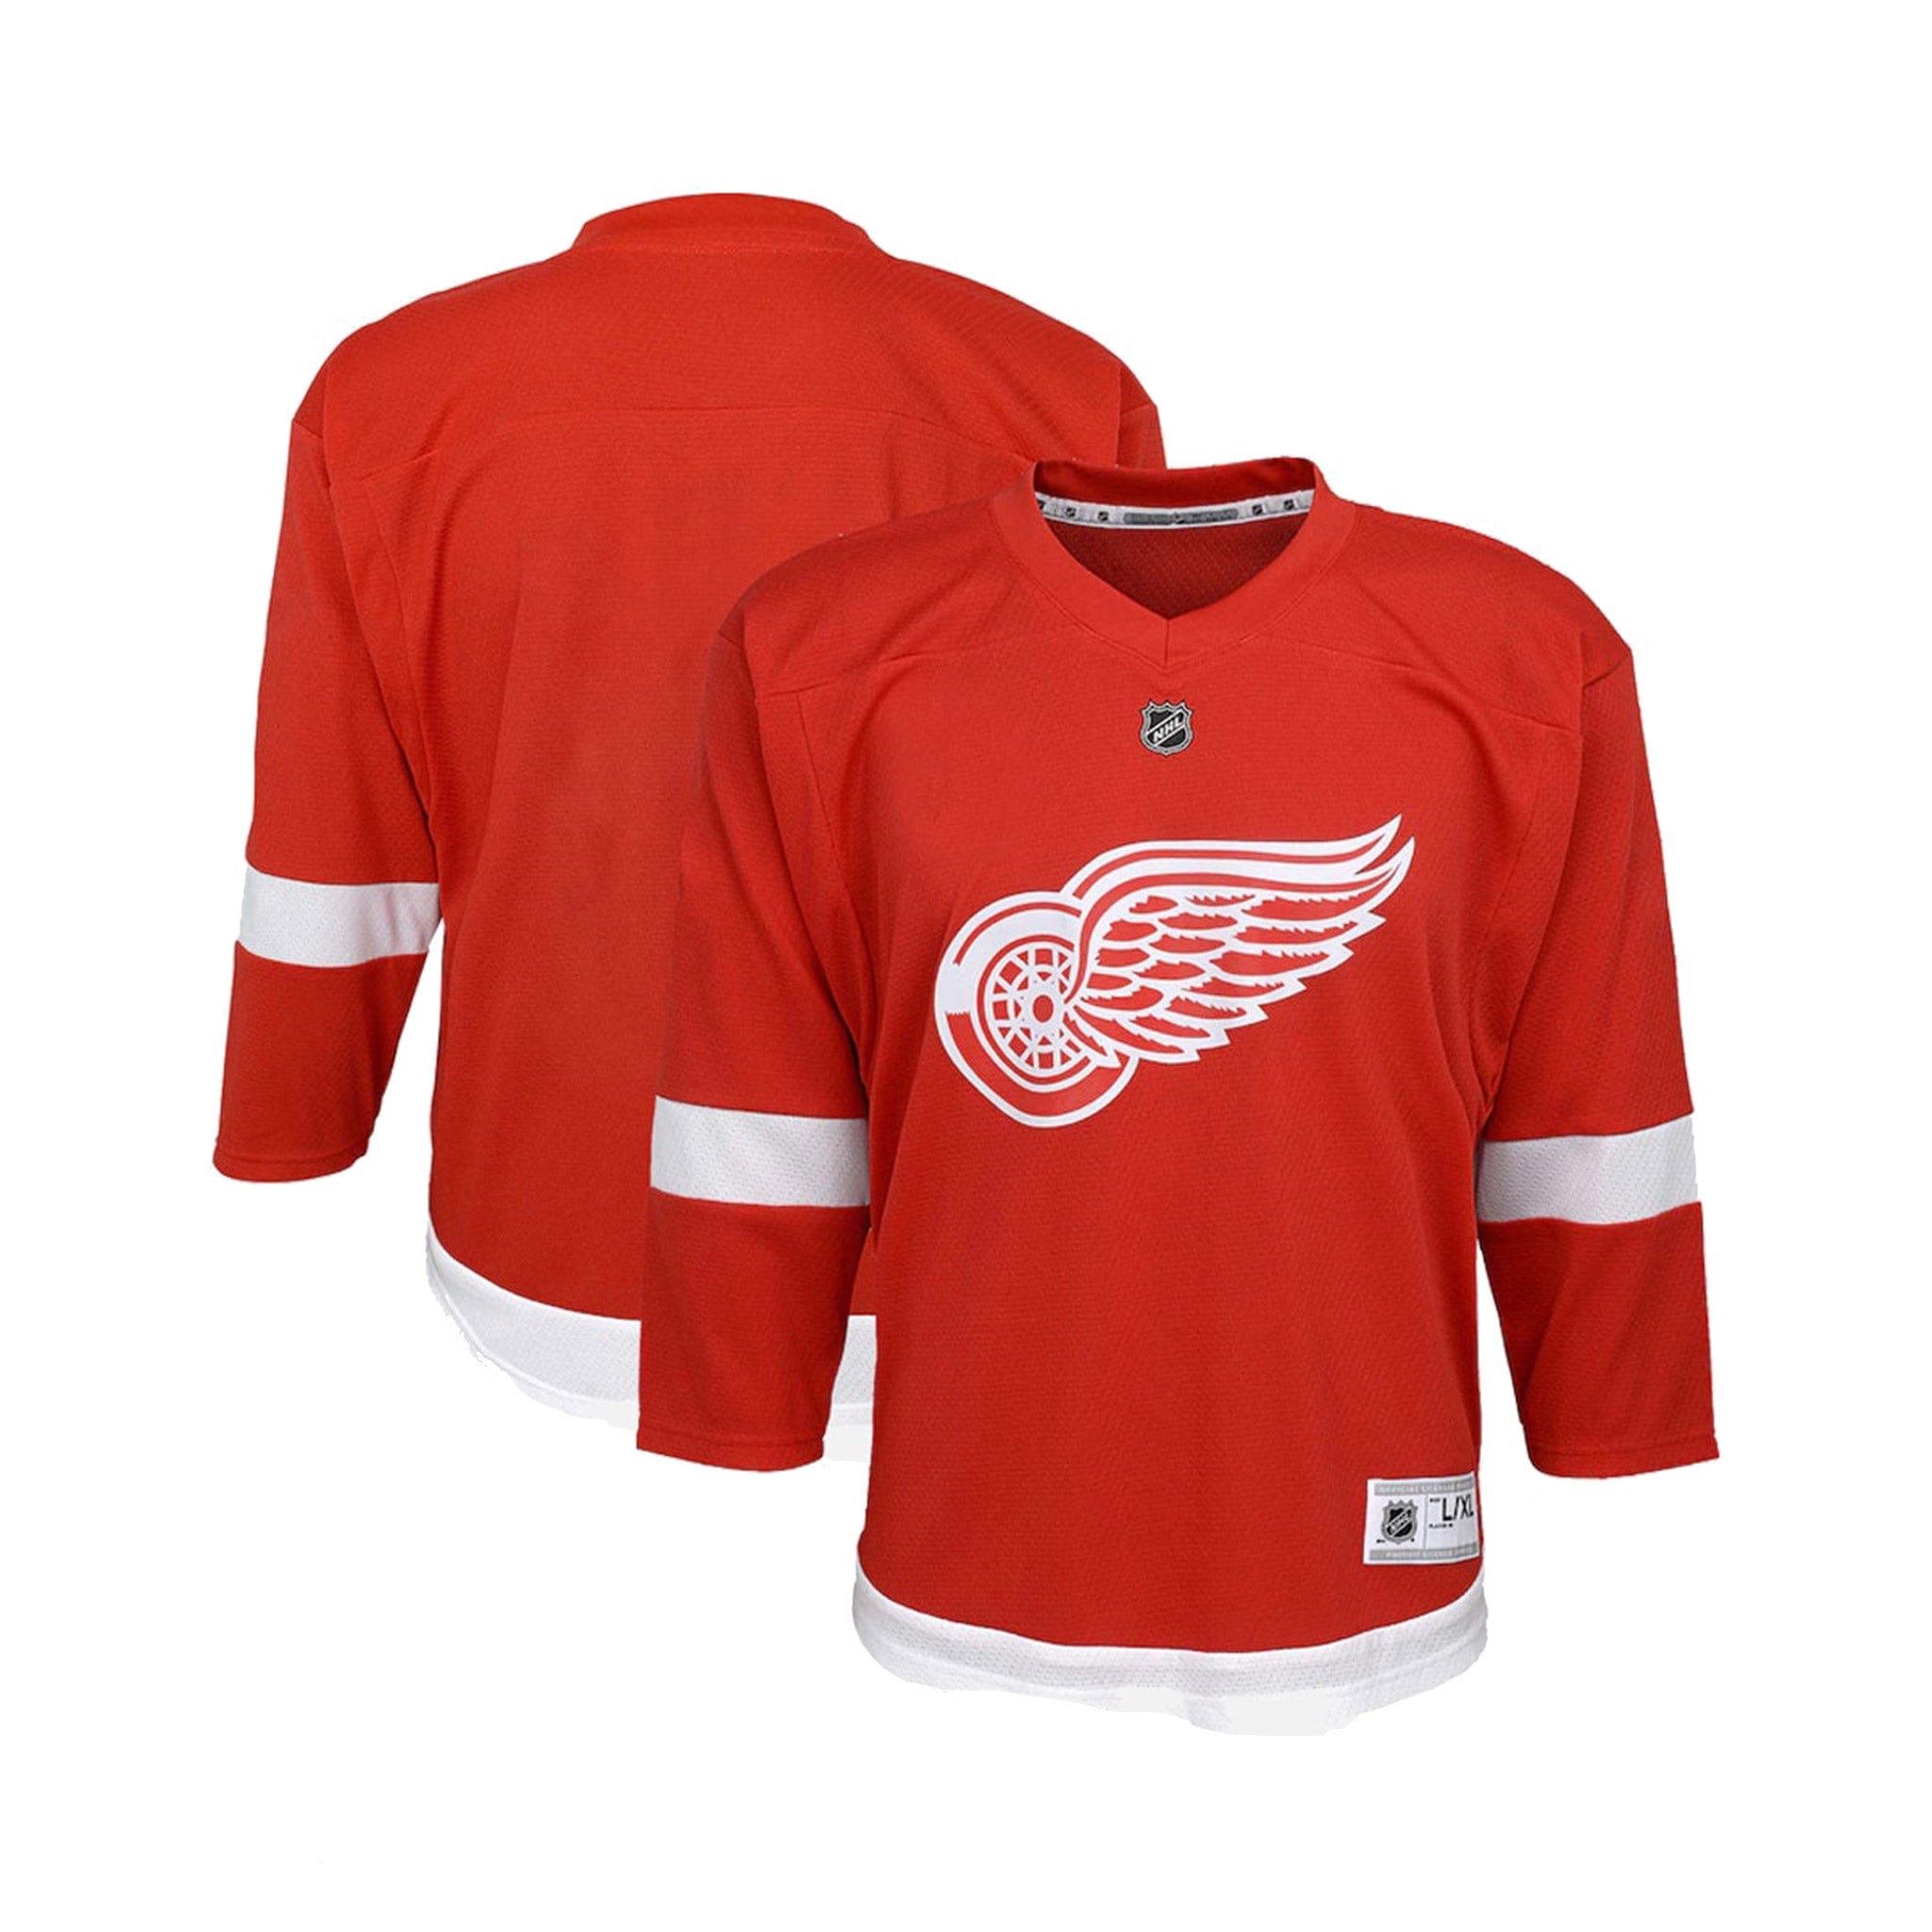 Youth Fanatics Branded Red Detroit Red Wings Breakaway Home Jersey